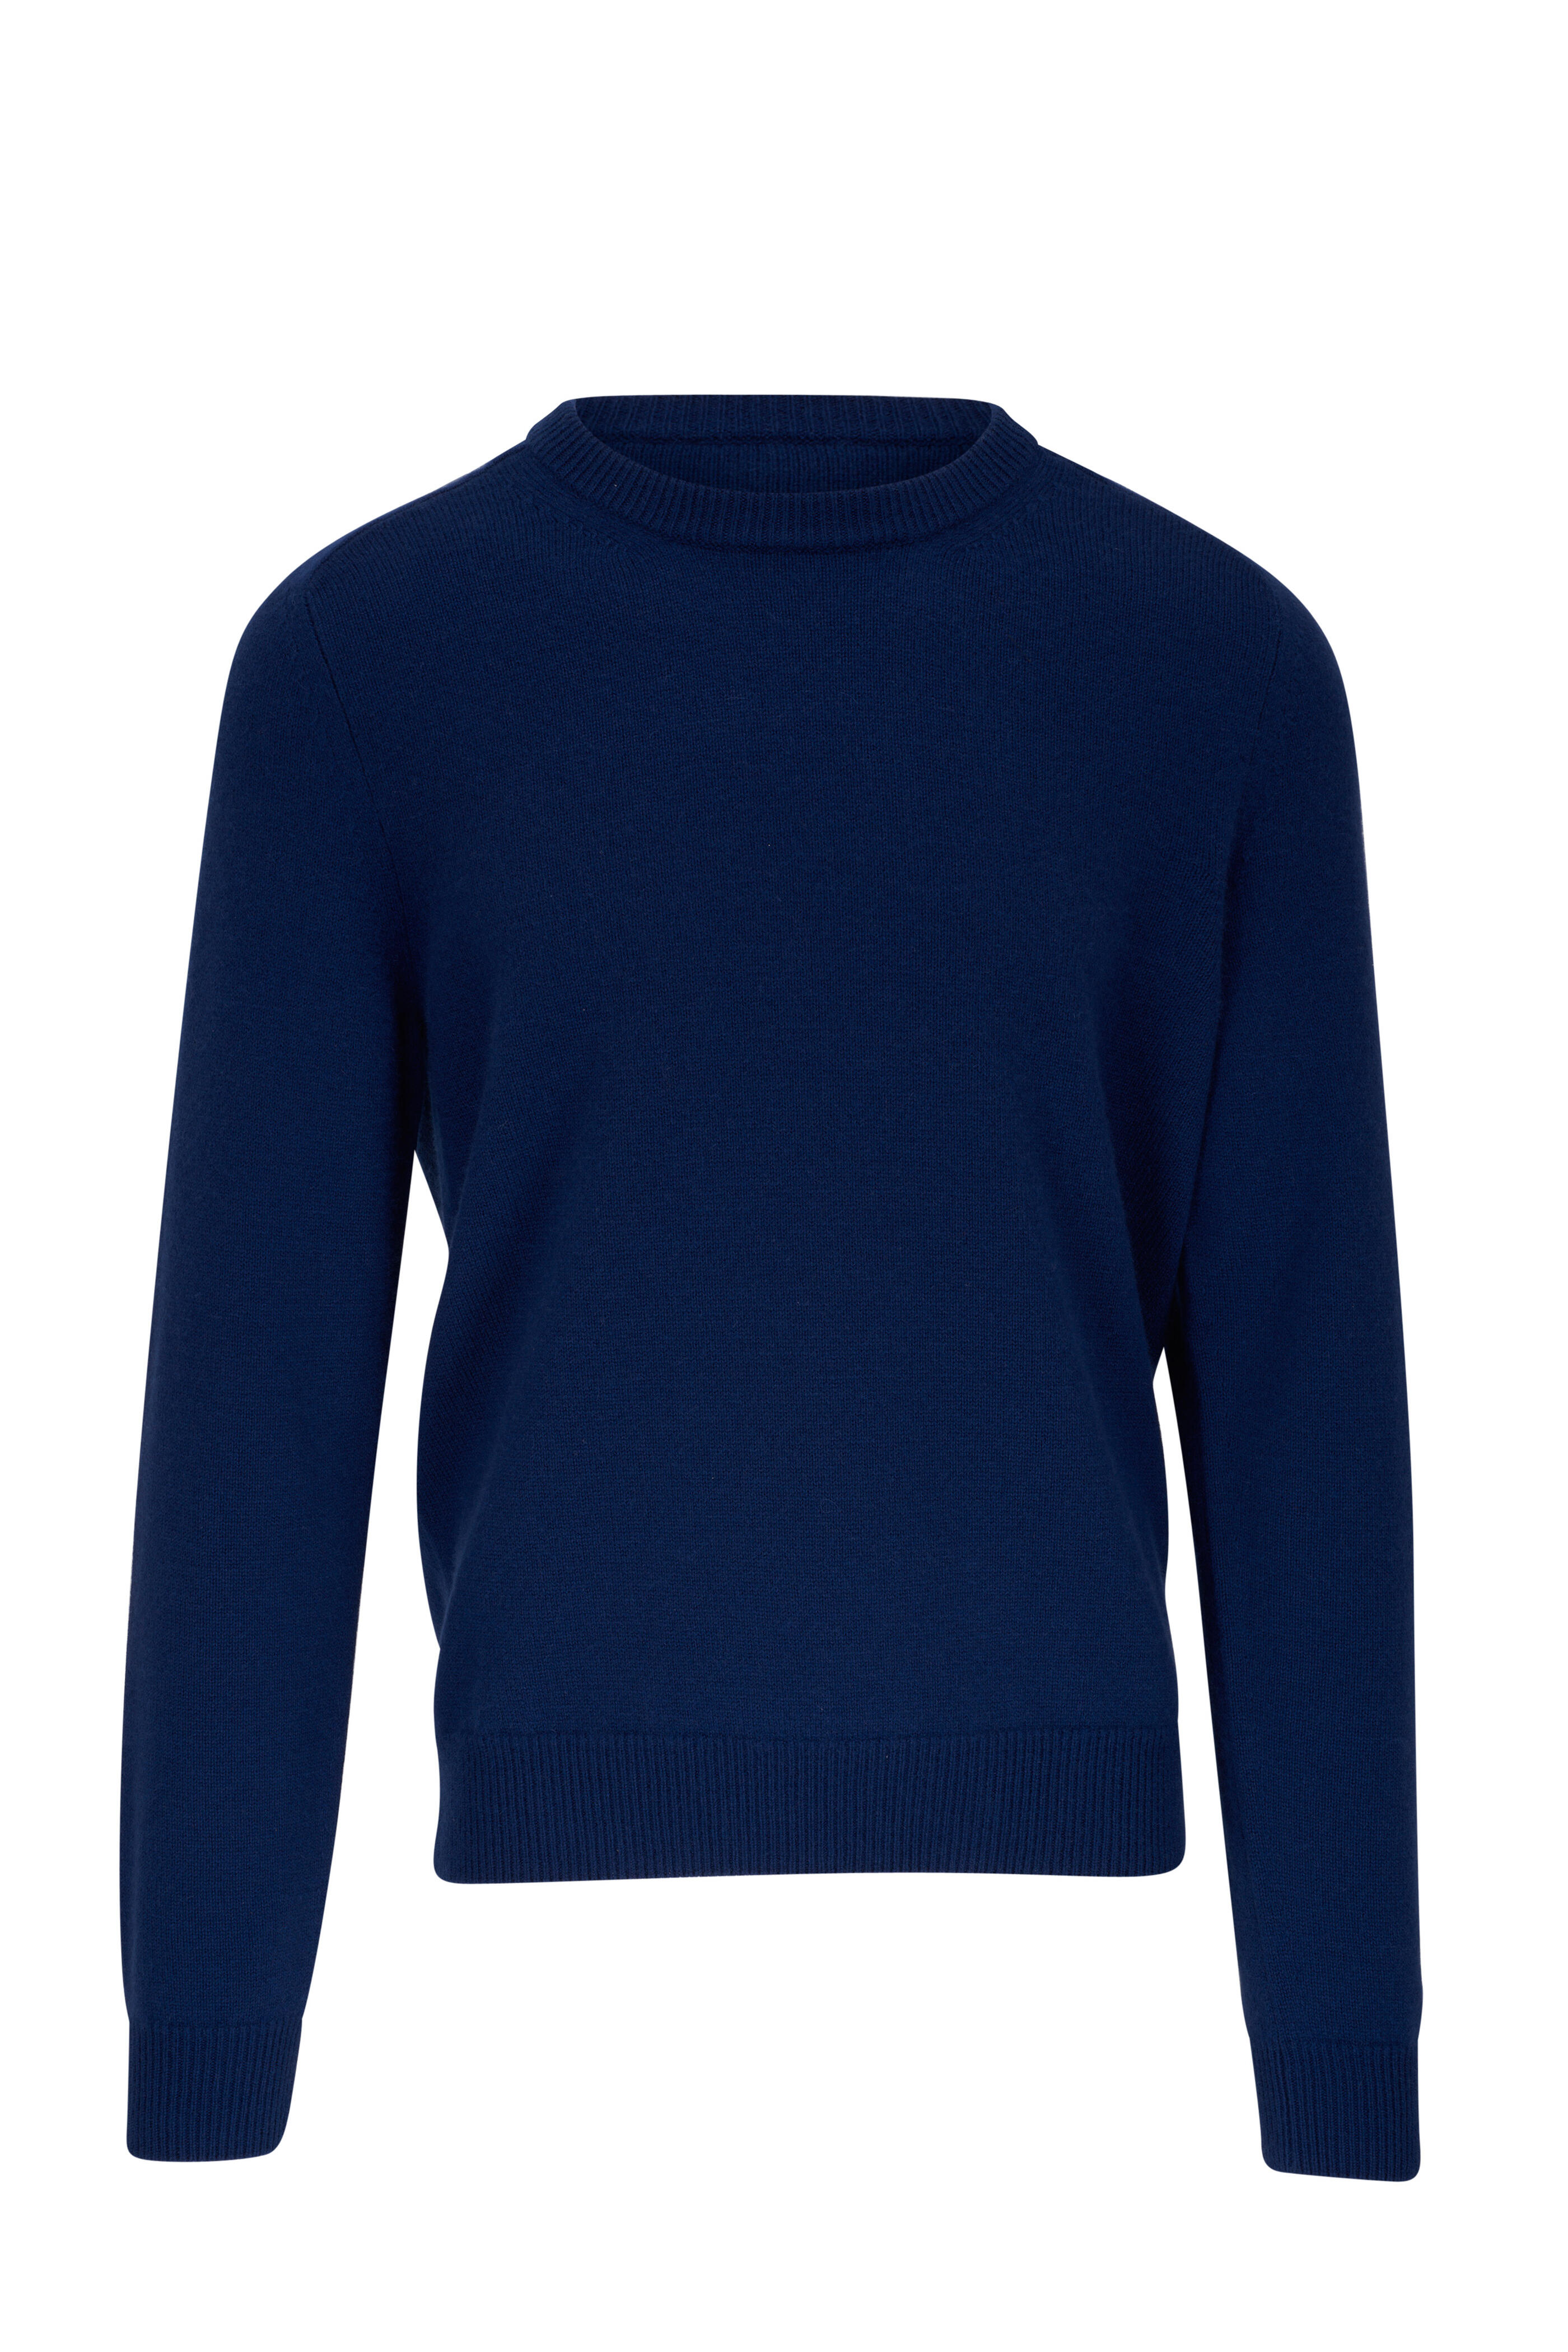 Tom Ford - Blue Saddle Crewneck Sweater | Mitchell Stores